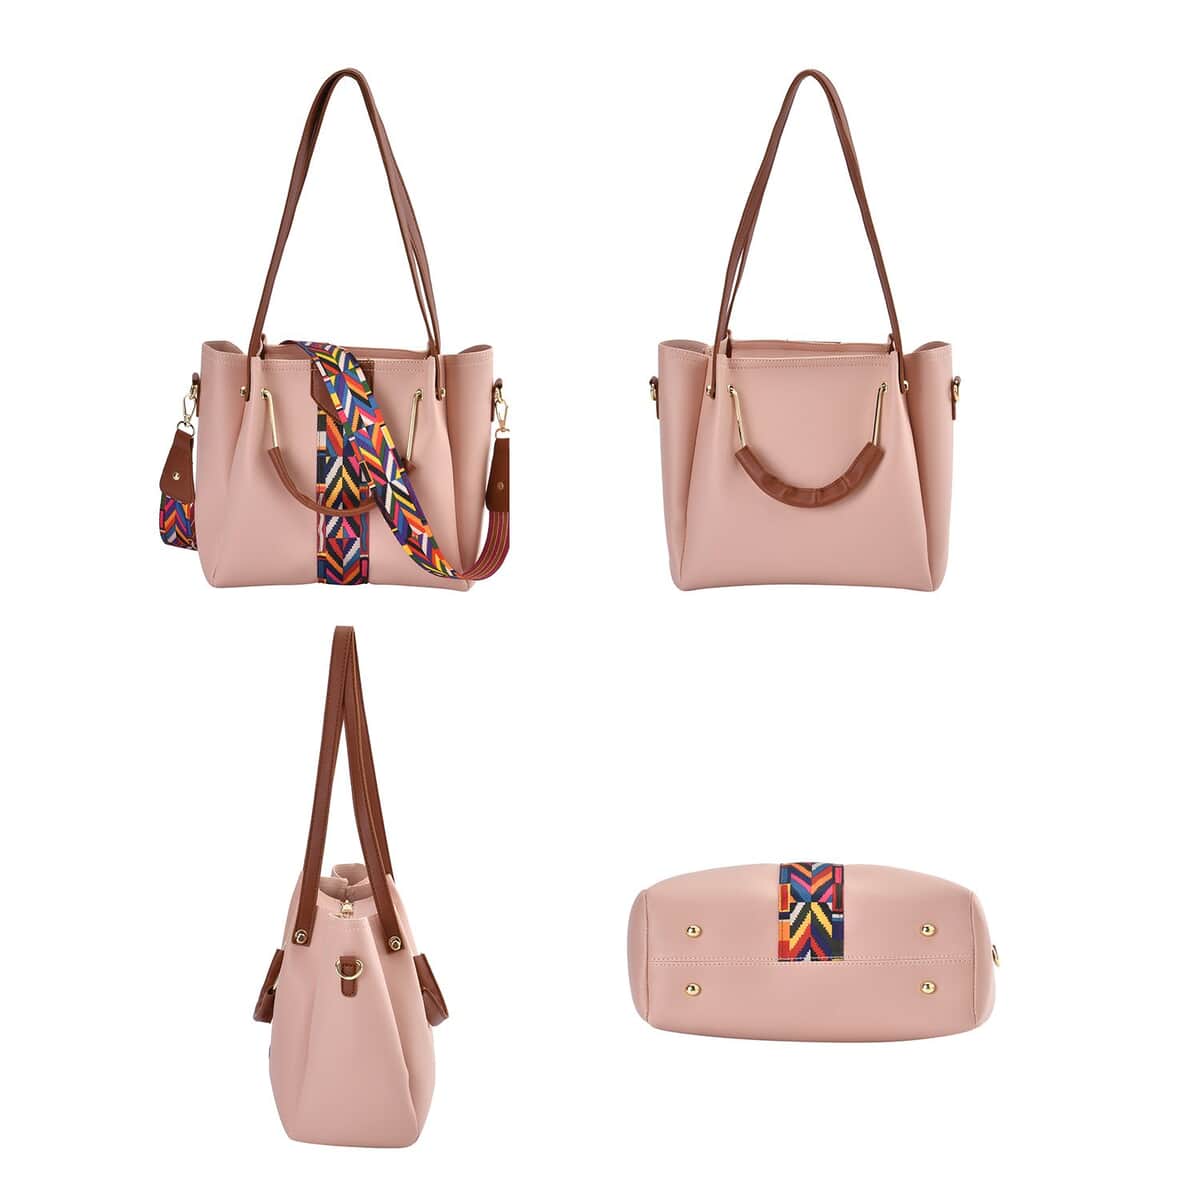 Set of 4 Pink Faux Leather Convertible Bag (9.84"x5.12"x9.84") with Crossbody Bag (9.06"x1.18"x5.91") Clutch Bag (7.87"x4.72") and Wallet (4.53"x2.76") image number 1